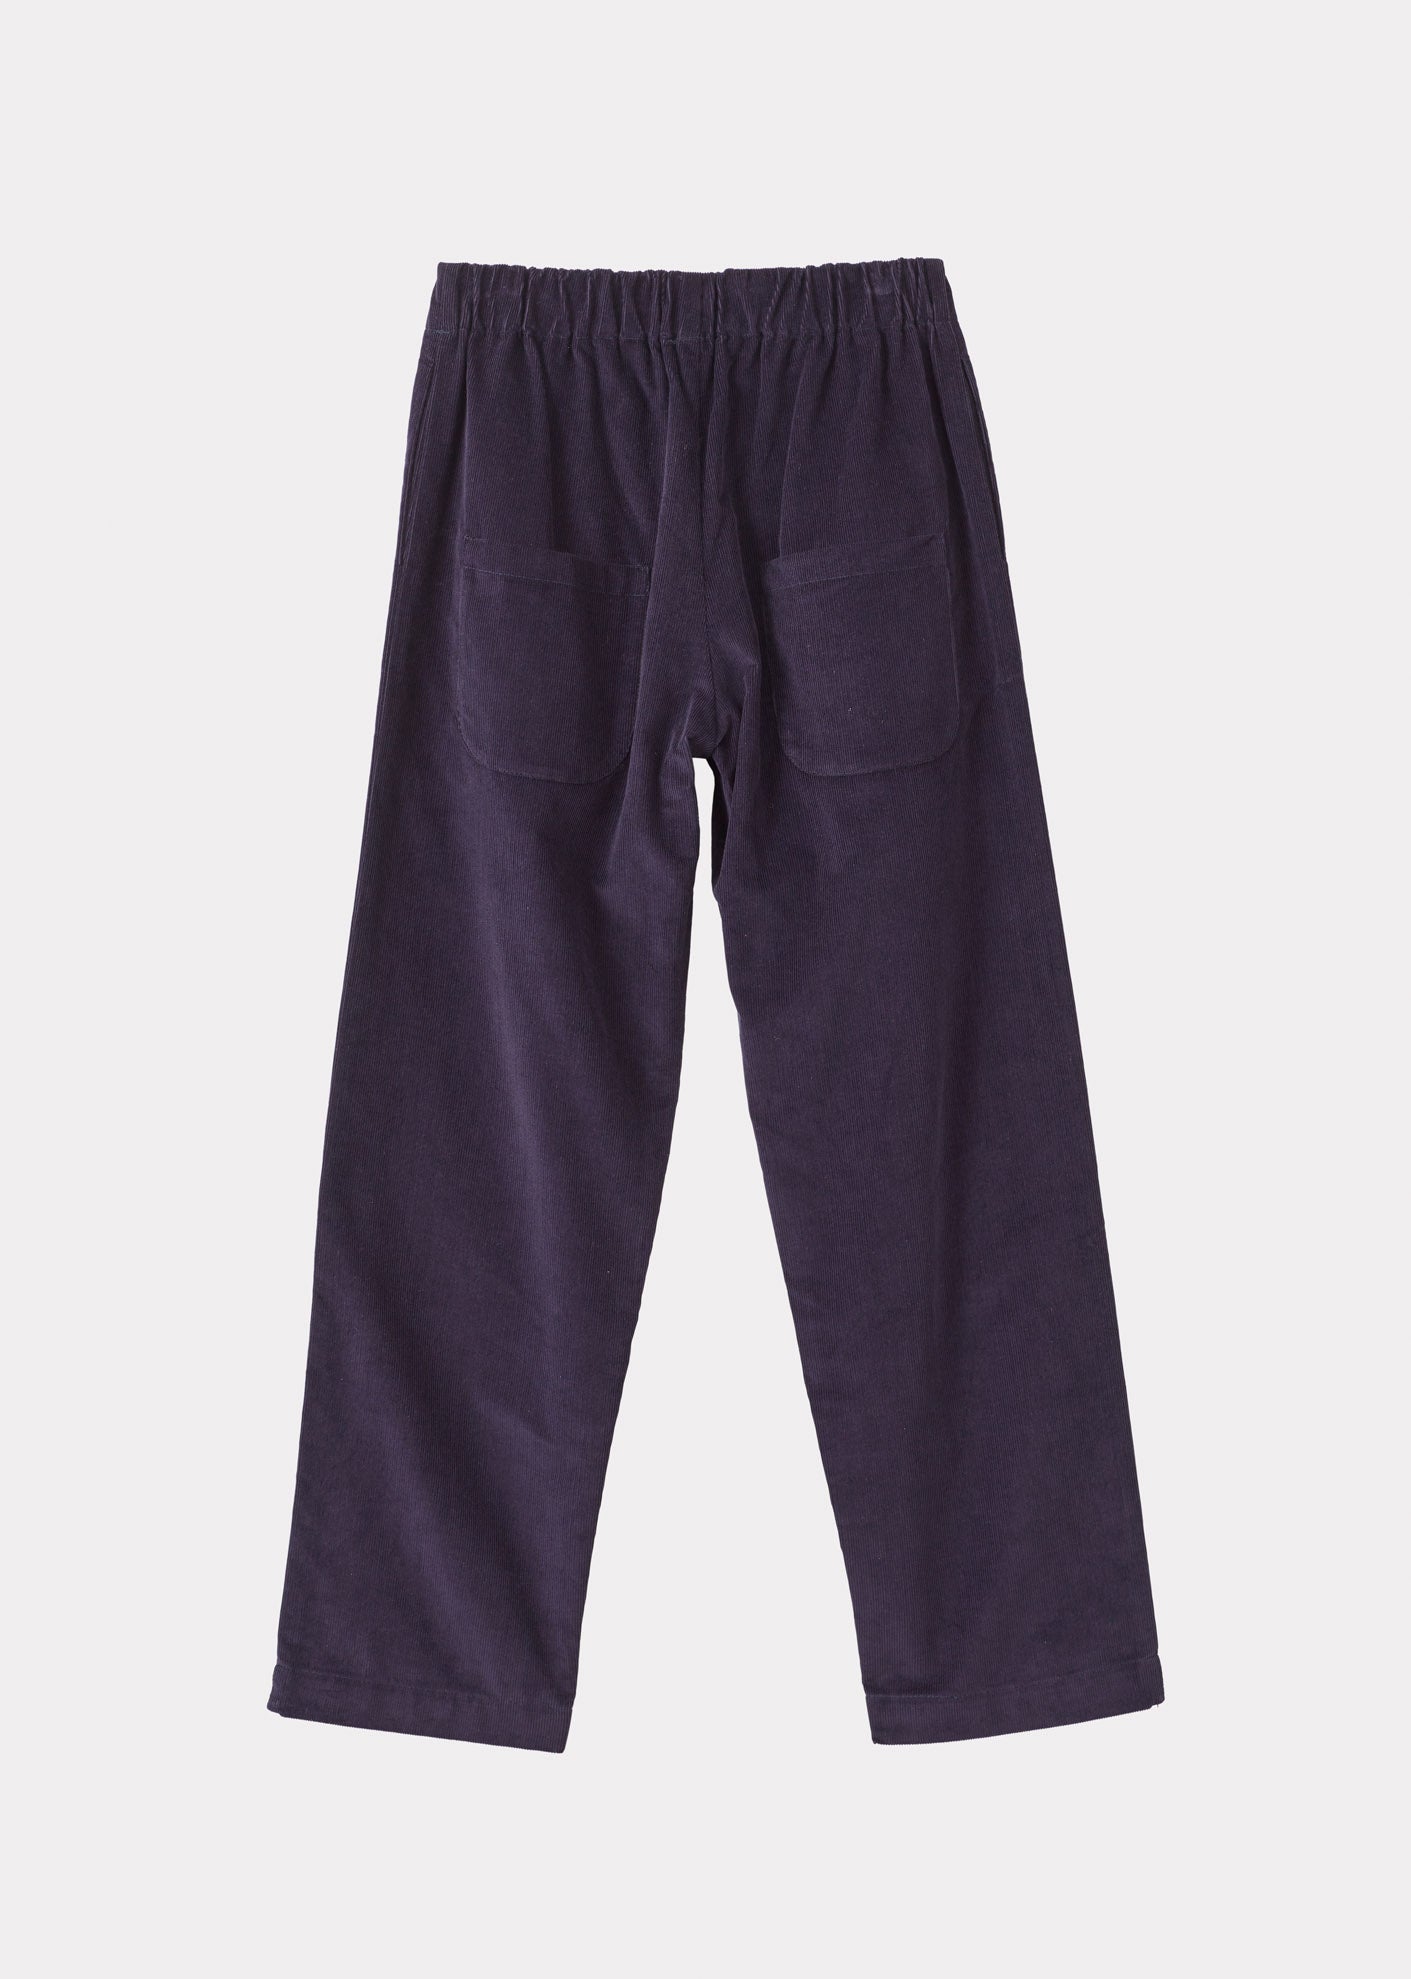 CHICHESTER TROUSER WOMAN - NAVY